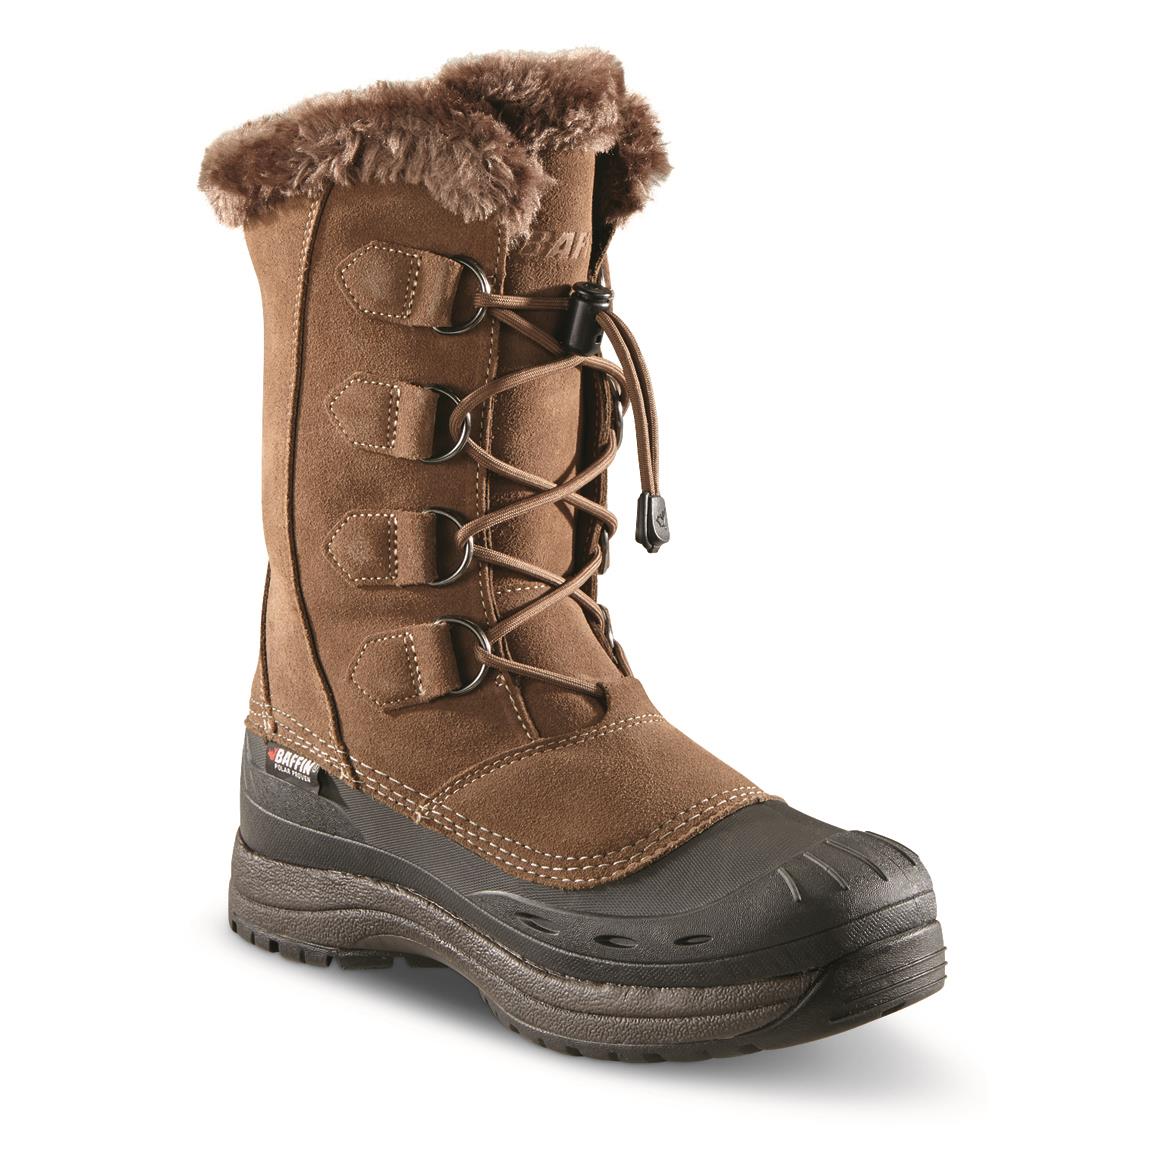 Baffin Women's Chloe Waterproof Insulated Boots, Taupe